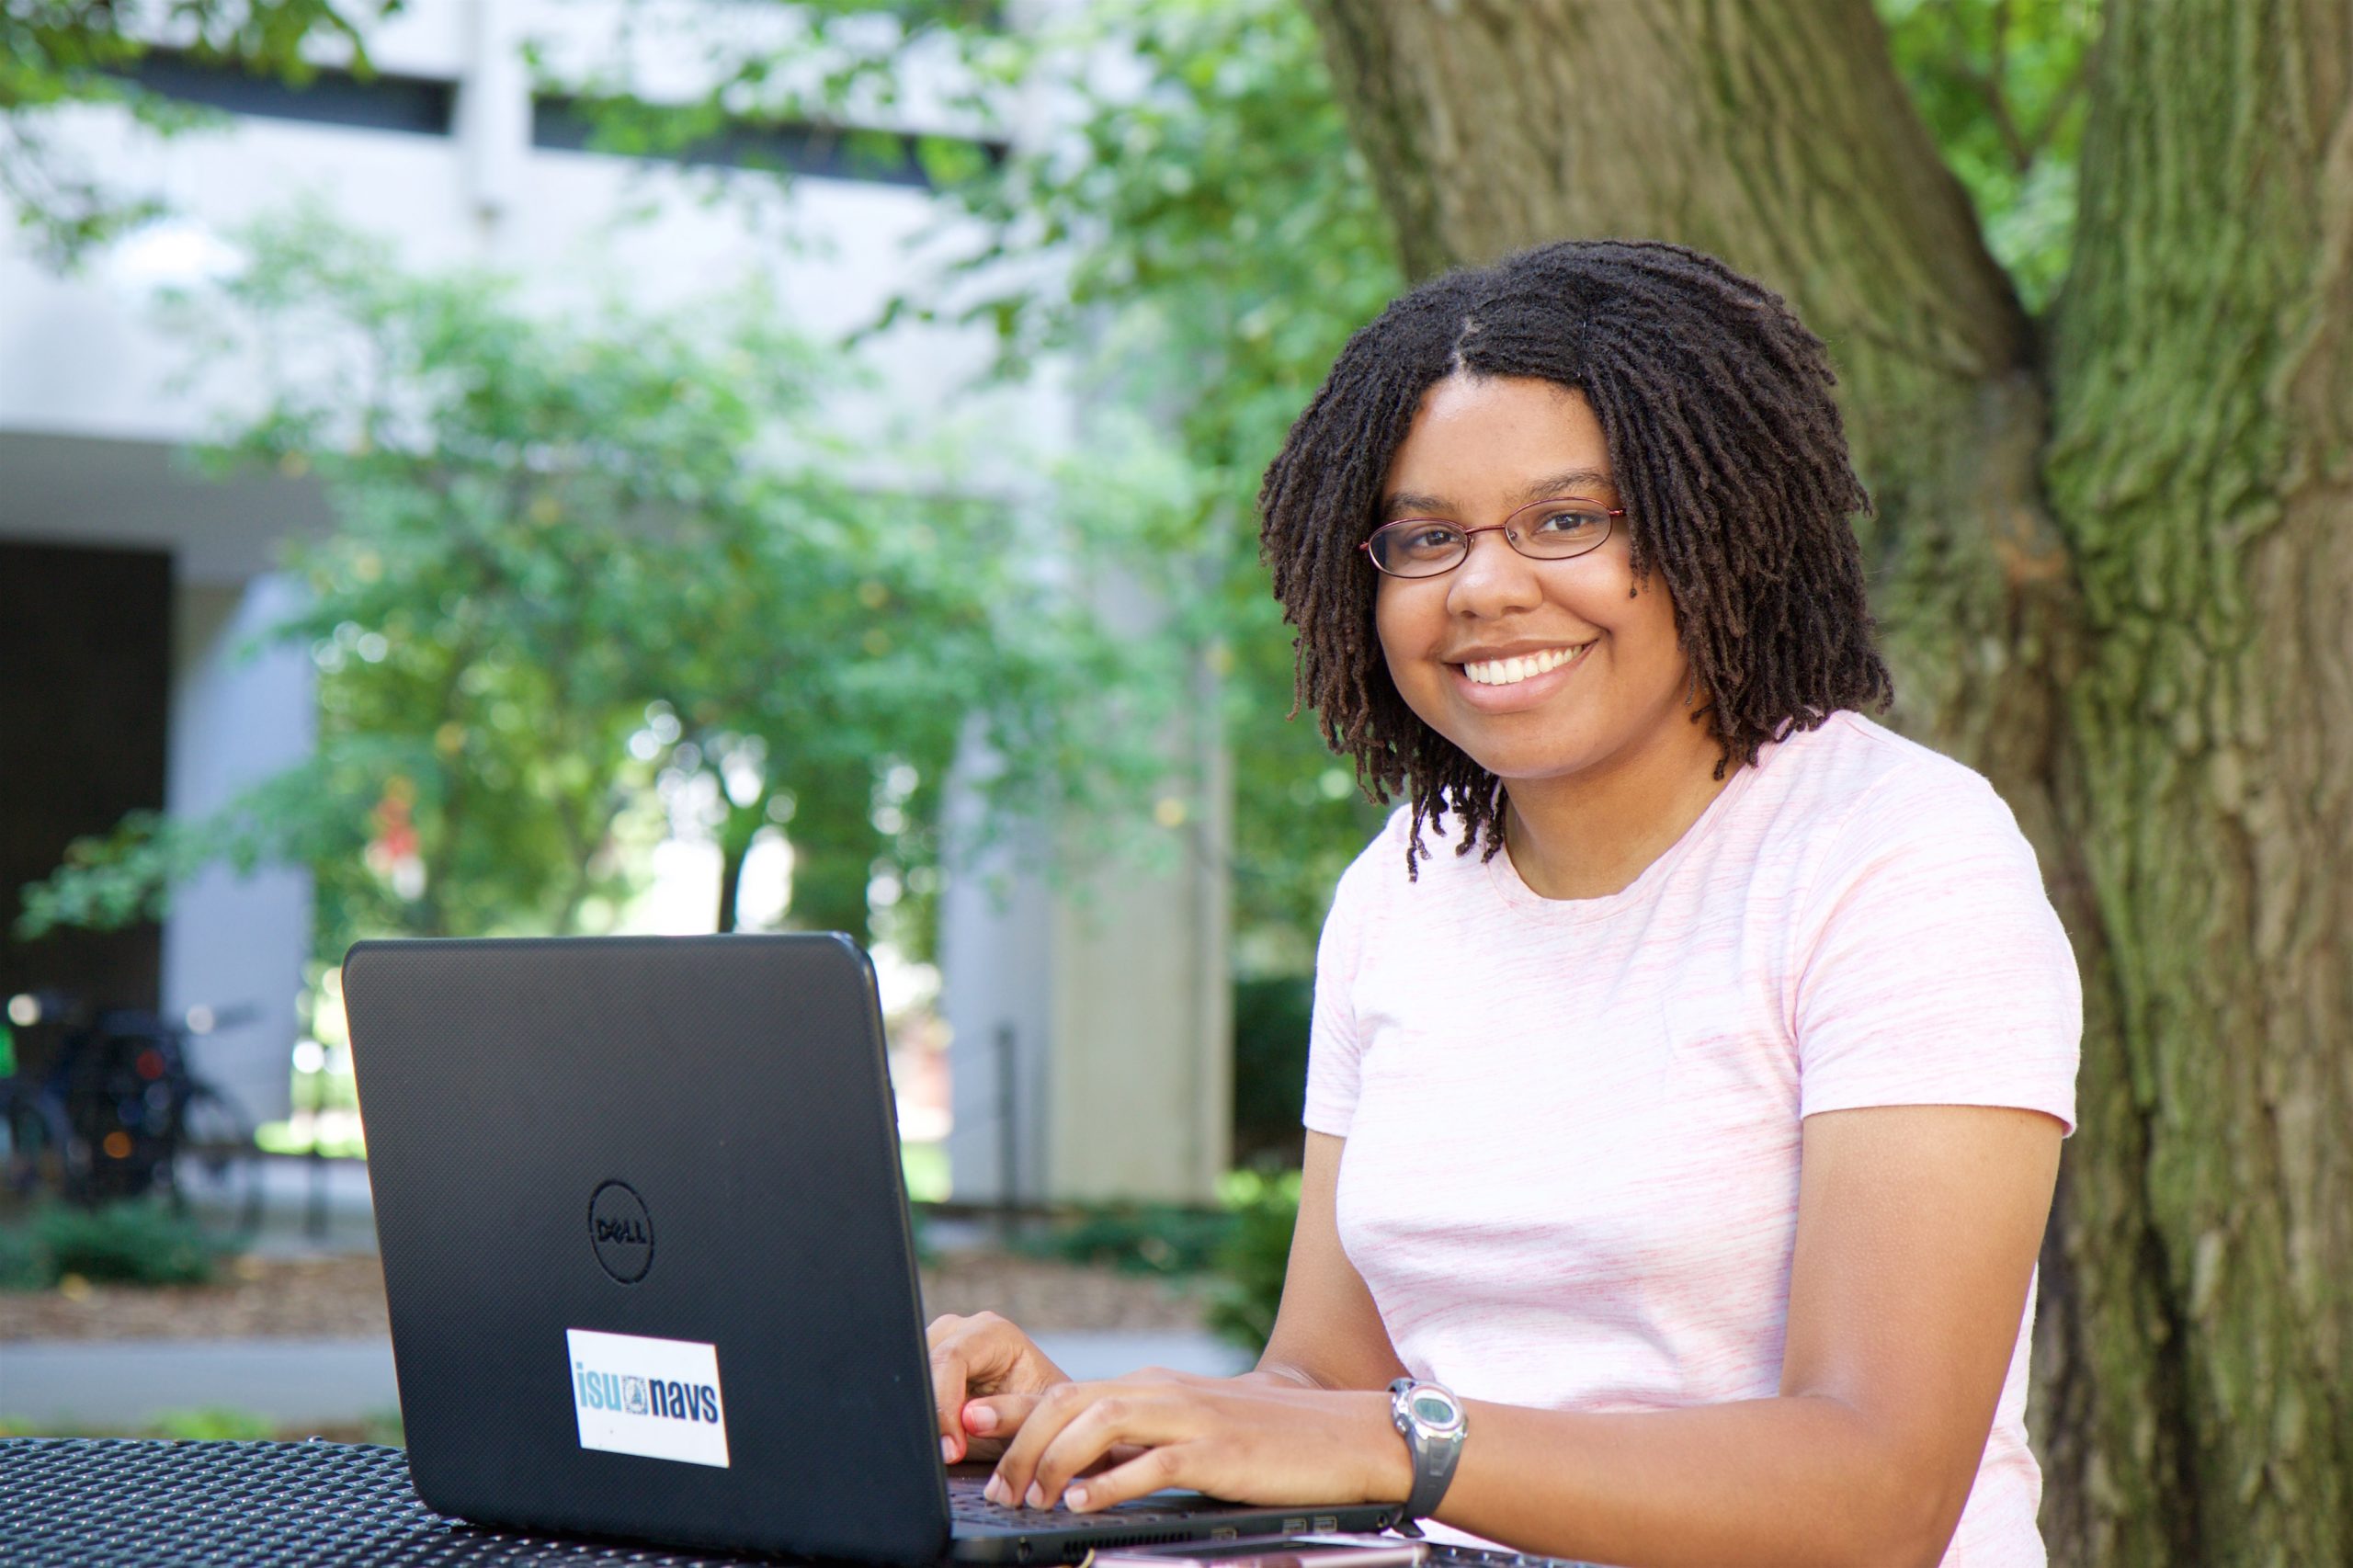 Student Catherine Thompson studies outside on her laptop at a picnic table beneath the trees near Carver Hall.